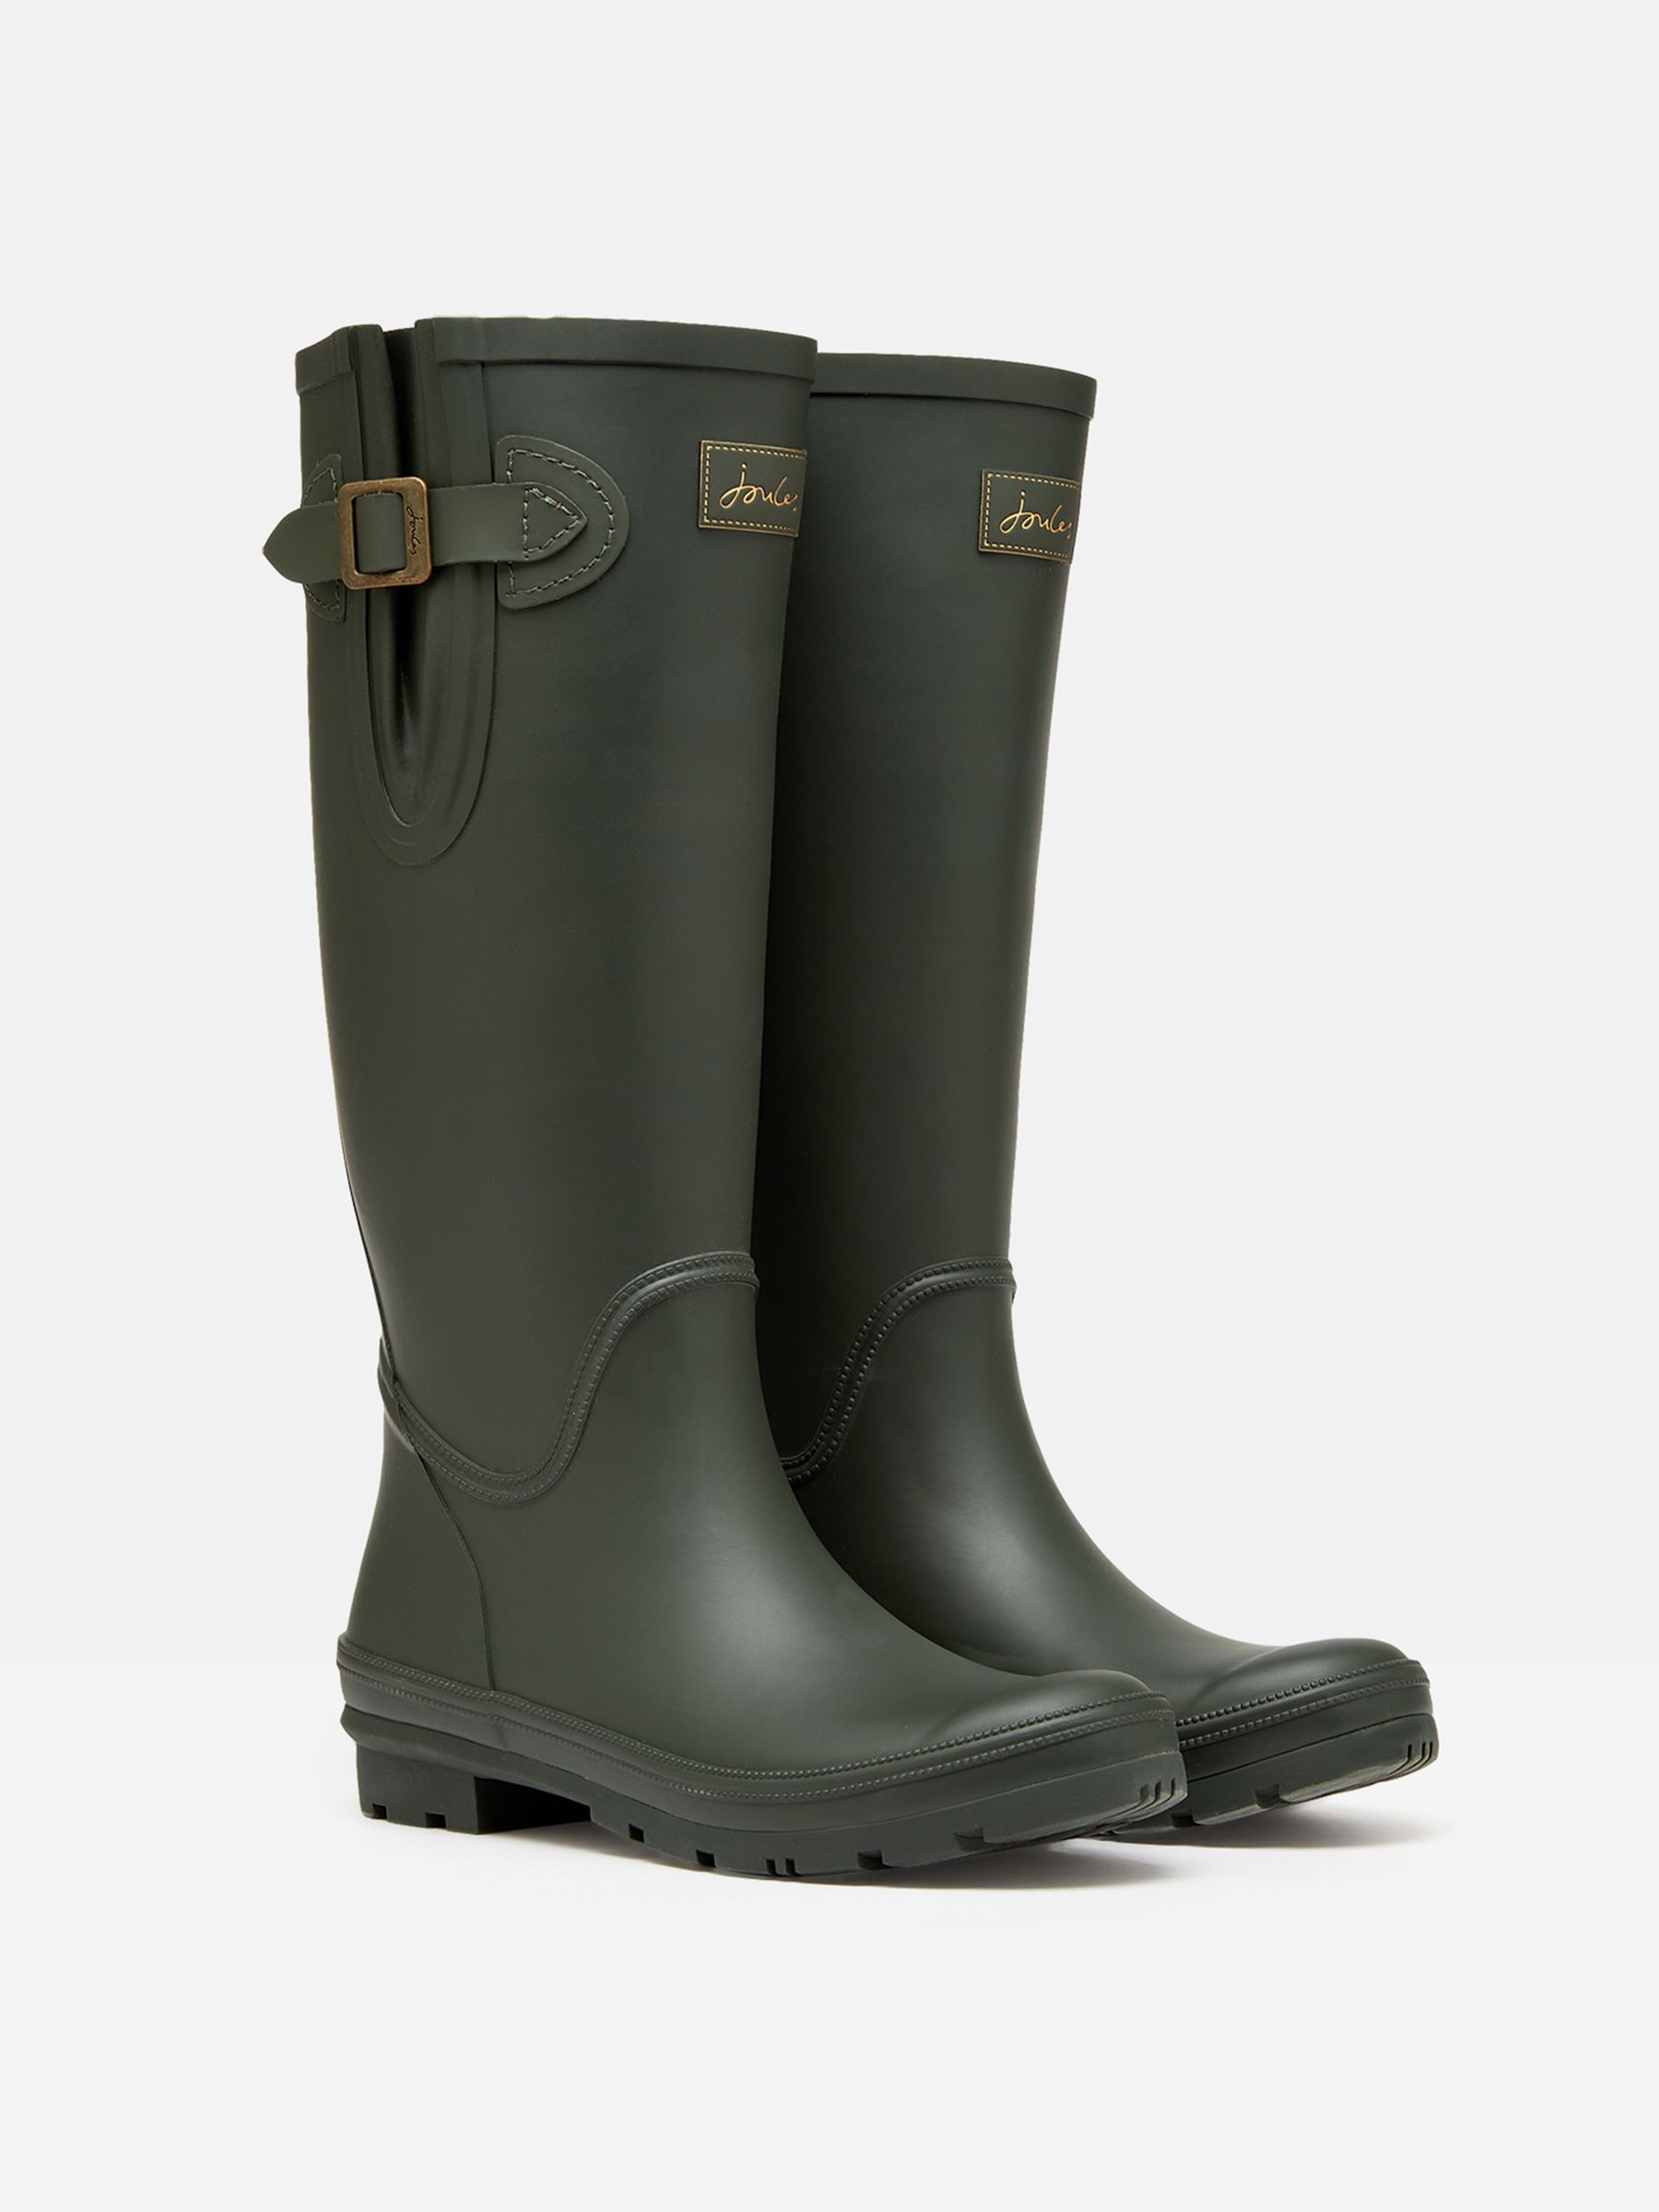 Buy Houghton Green Adjustable Tall Wellies from the Joules online shop